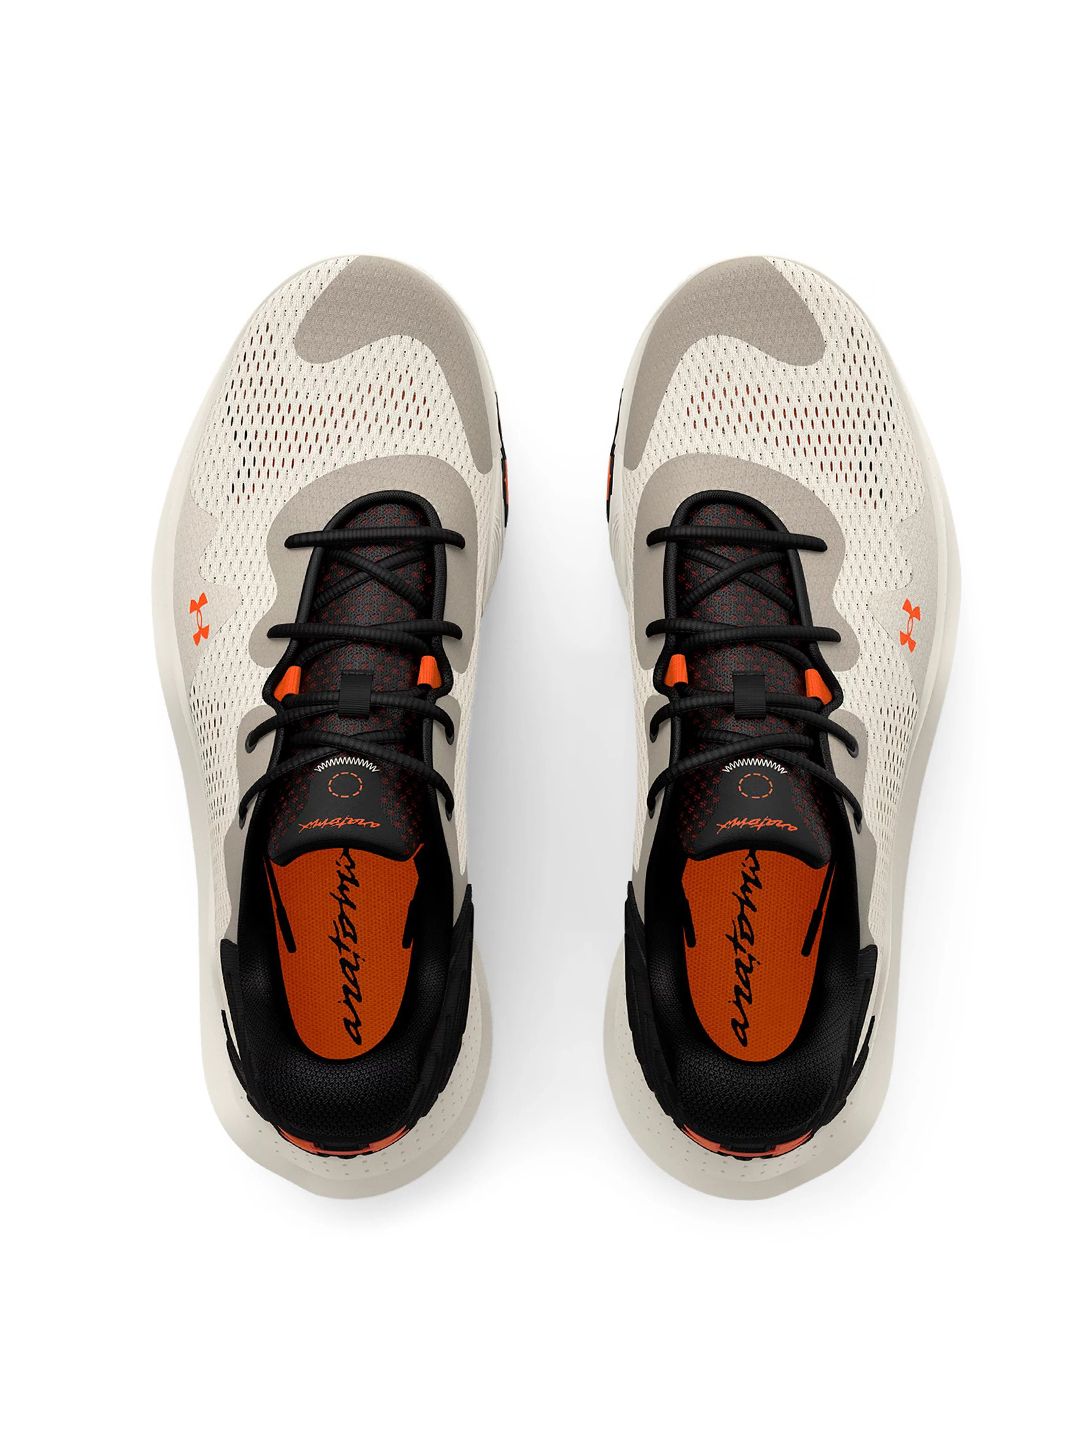 UNDER ARMOUR Unisex Off-White Spawn 4 Basketball Shoes Price in India